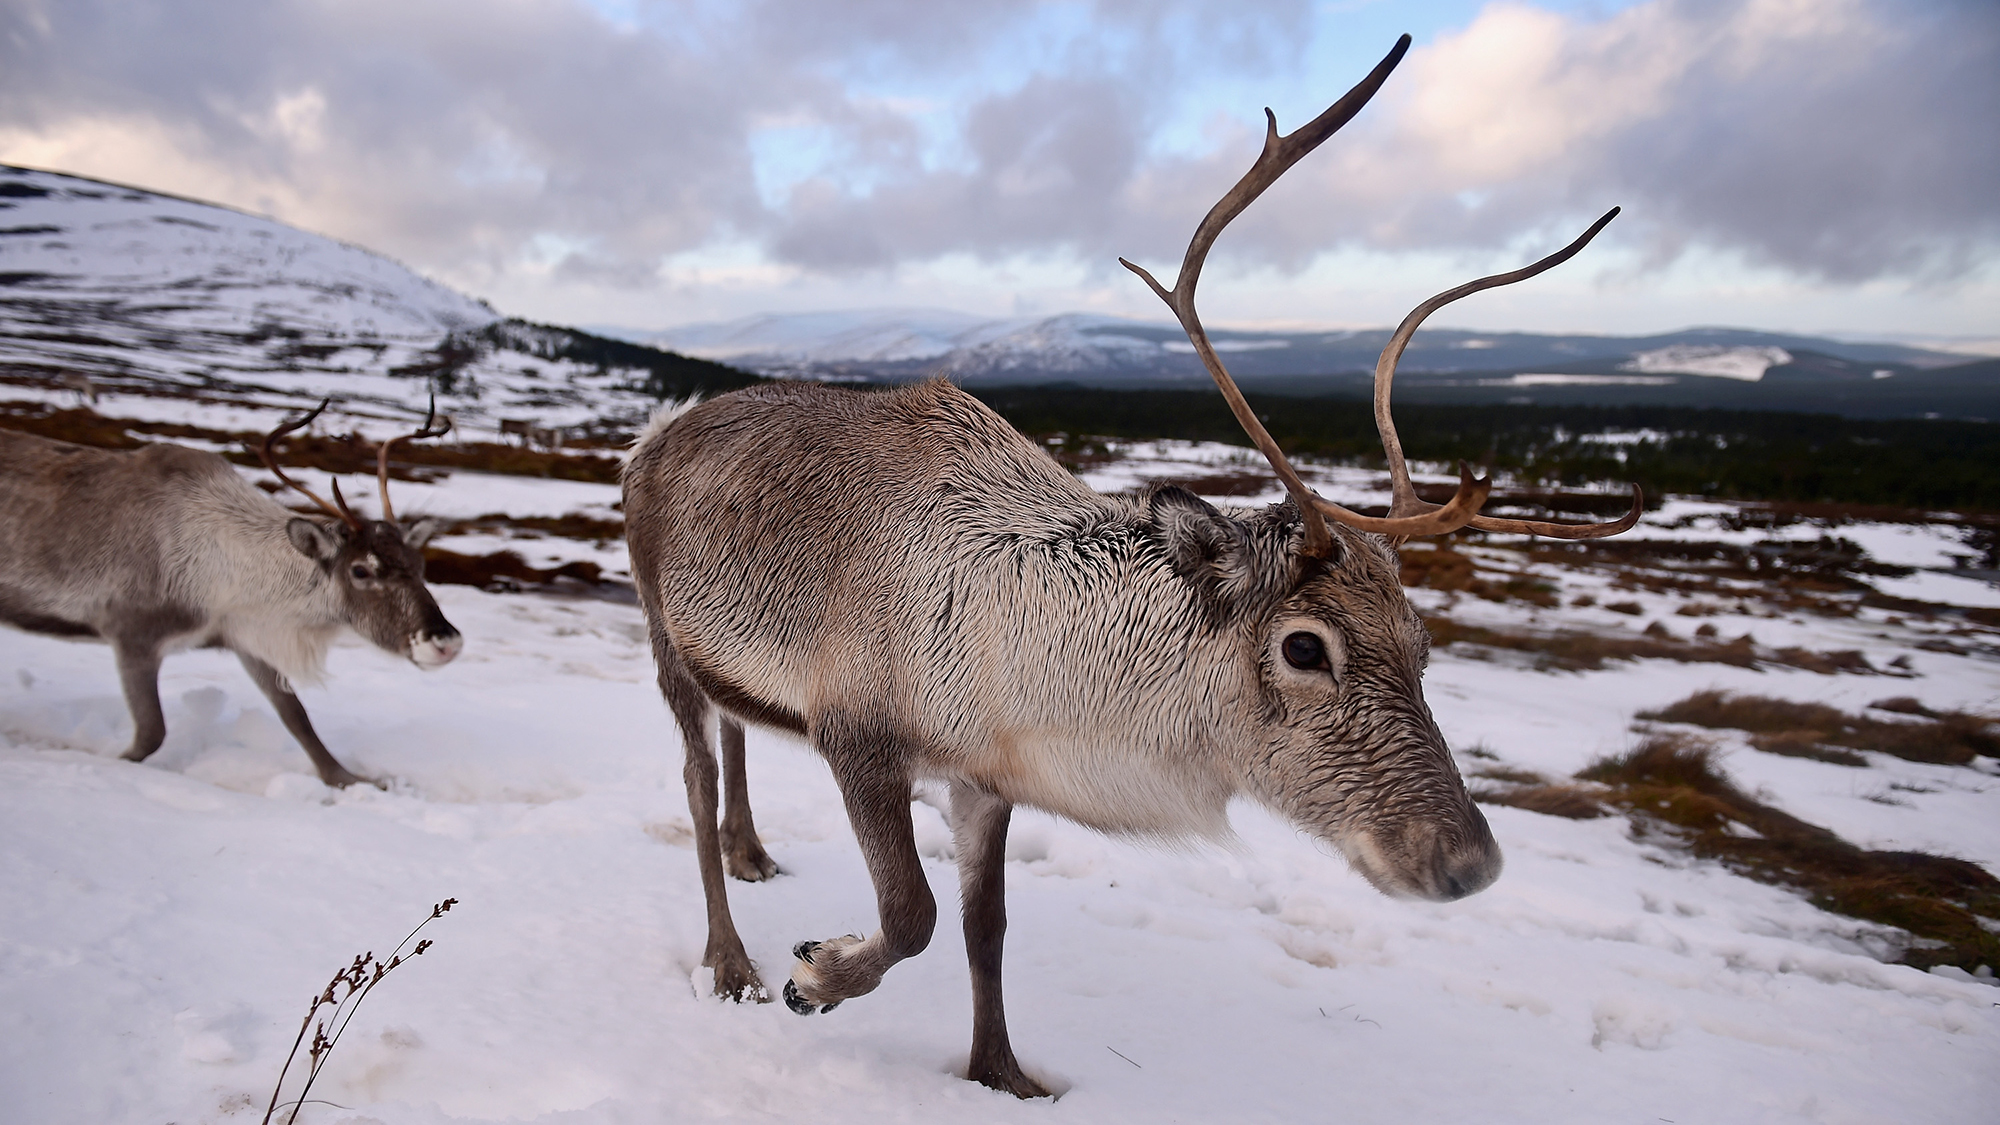 A reindeer stands on snowy ground with hills in the distance.